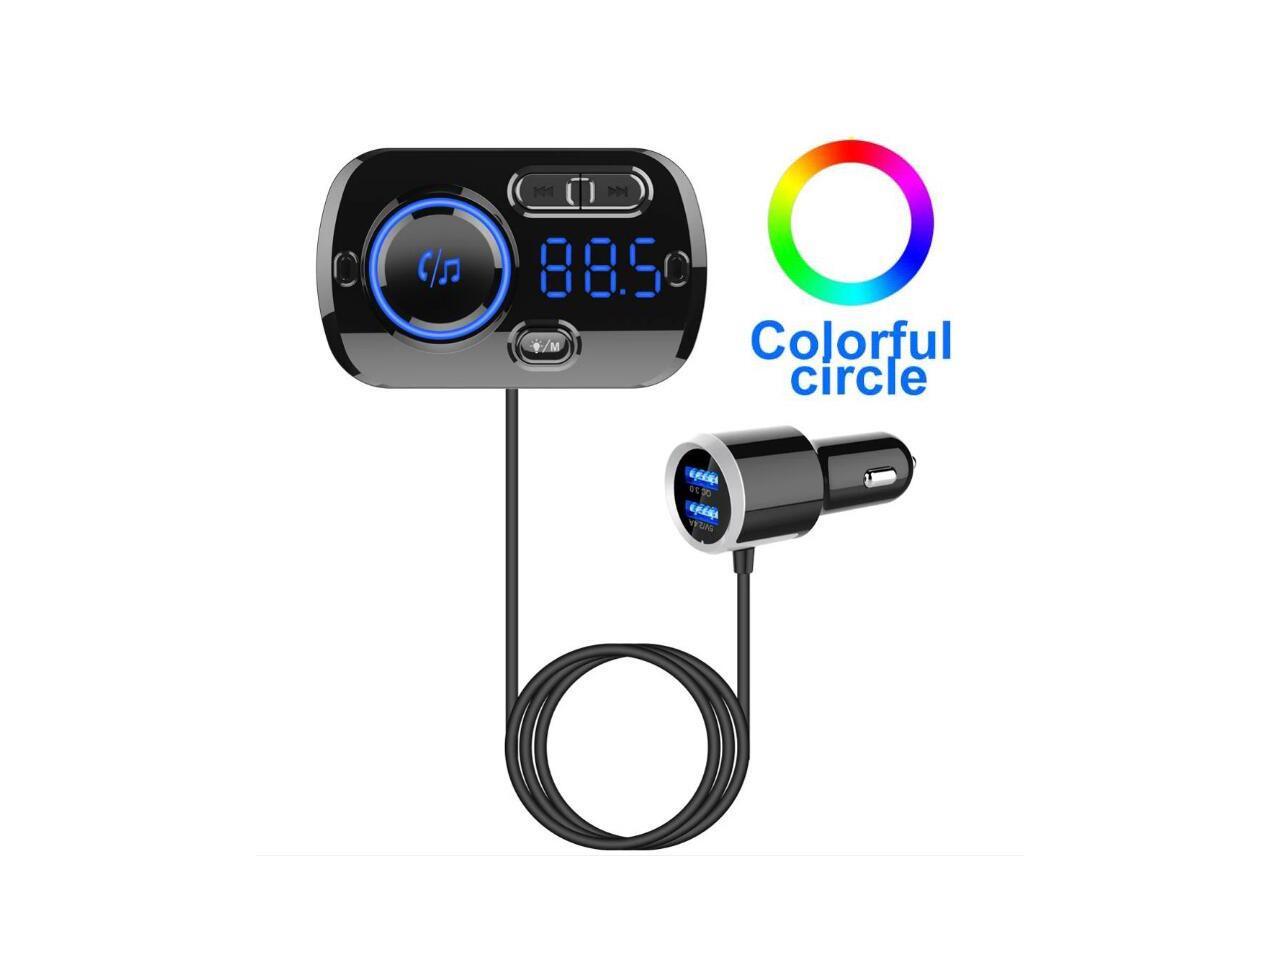 Bluetooth FM Transmitter for Car Audio Adapter Receiver Wireless Hands Free Car Kit with Smart Car Locator and 2 USB Ports Charger Support USB Drive 